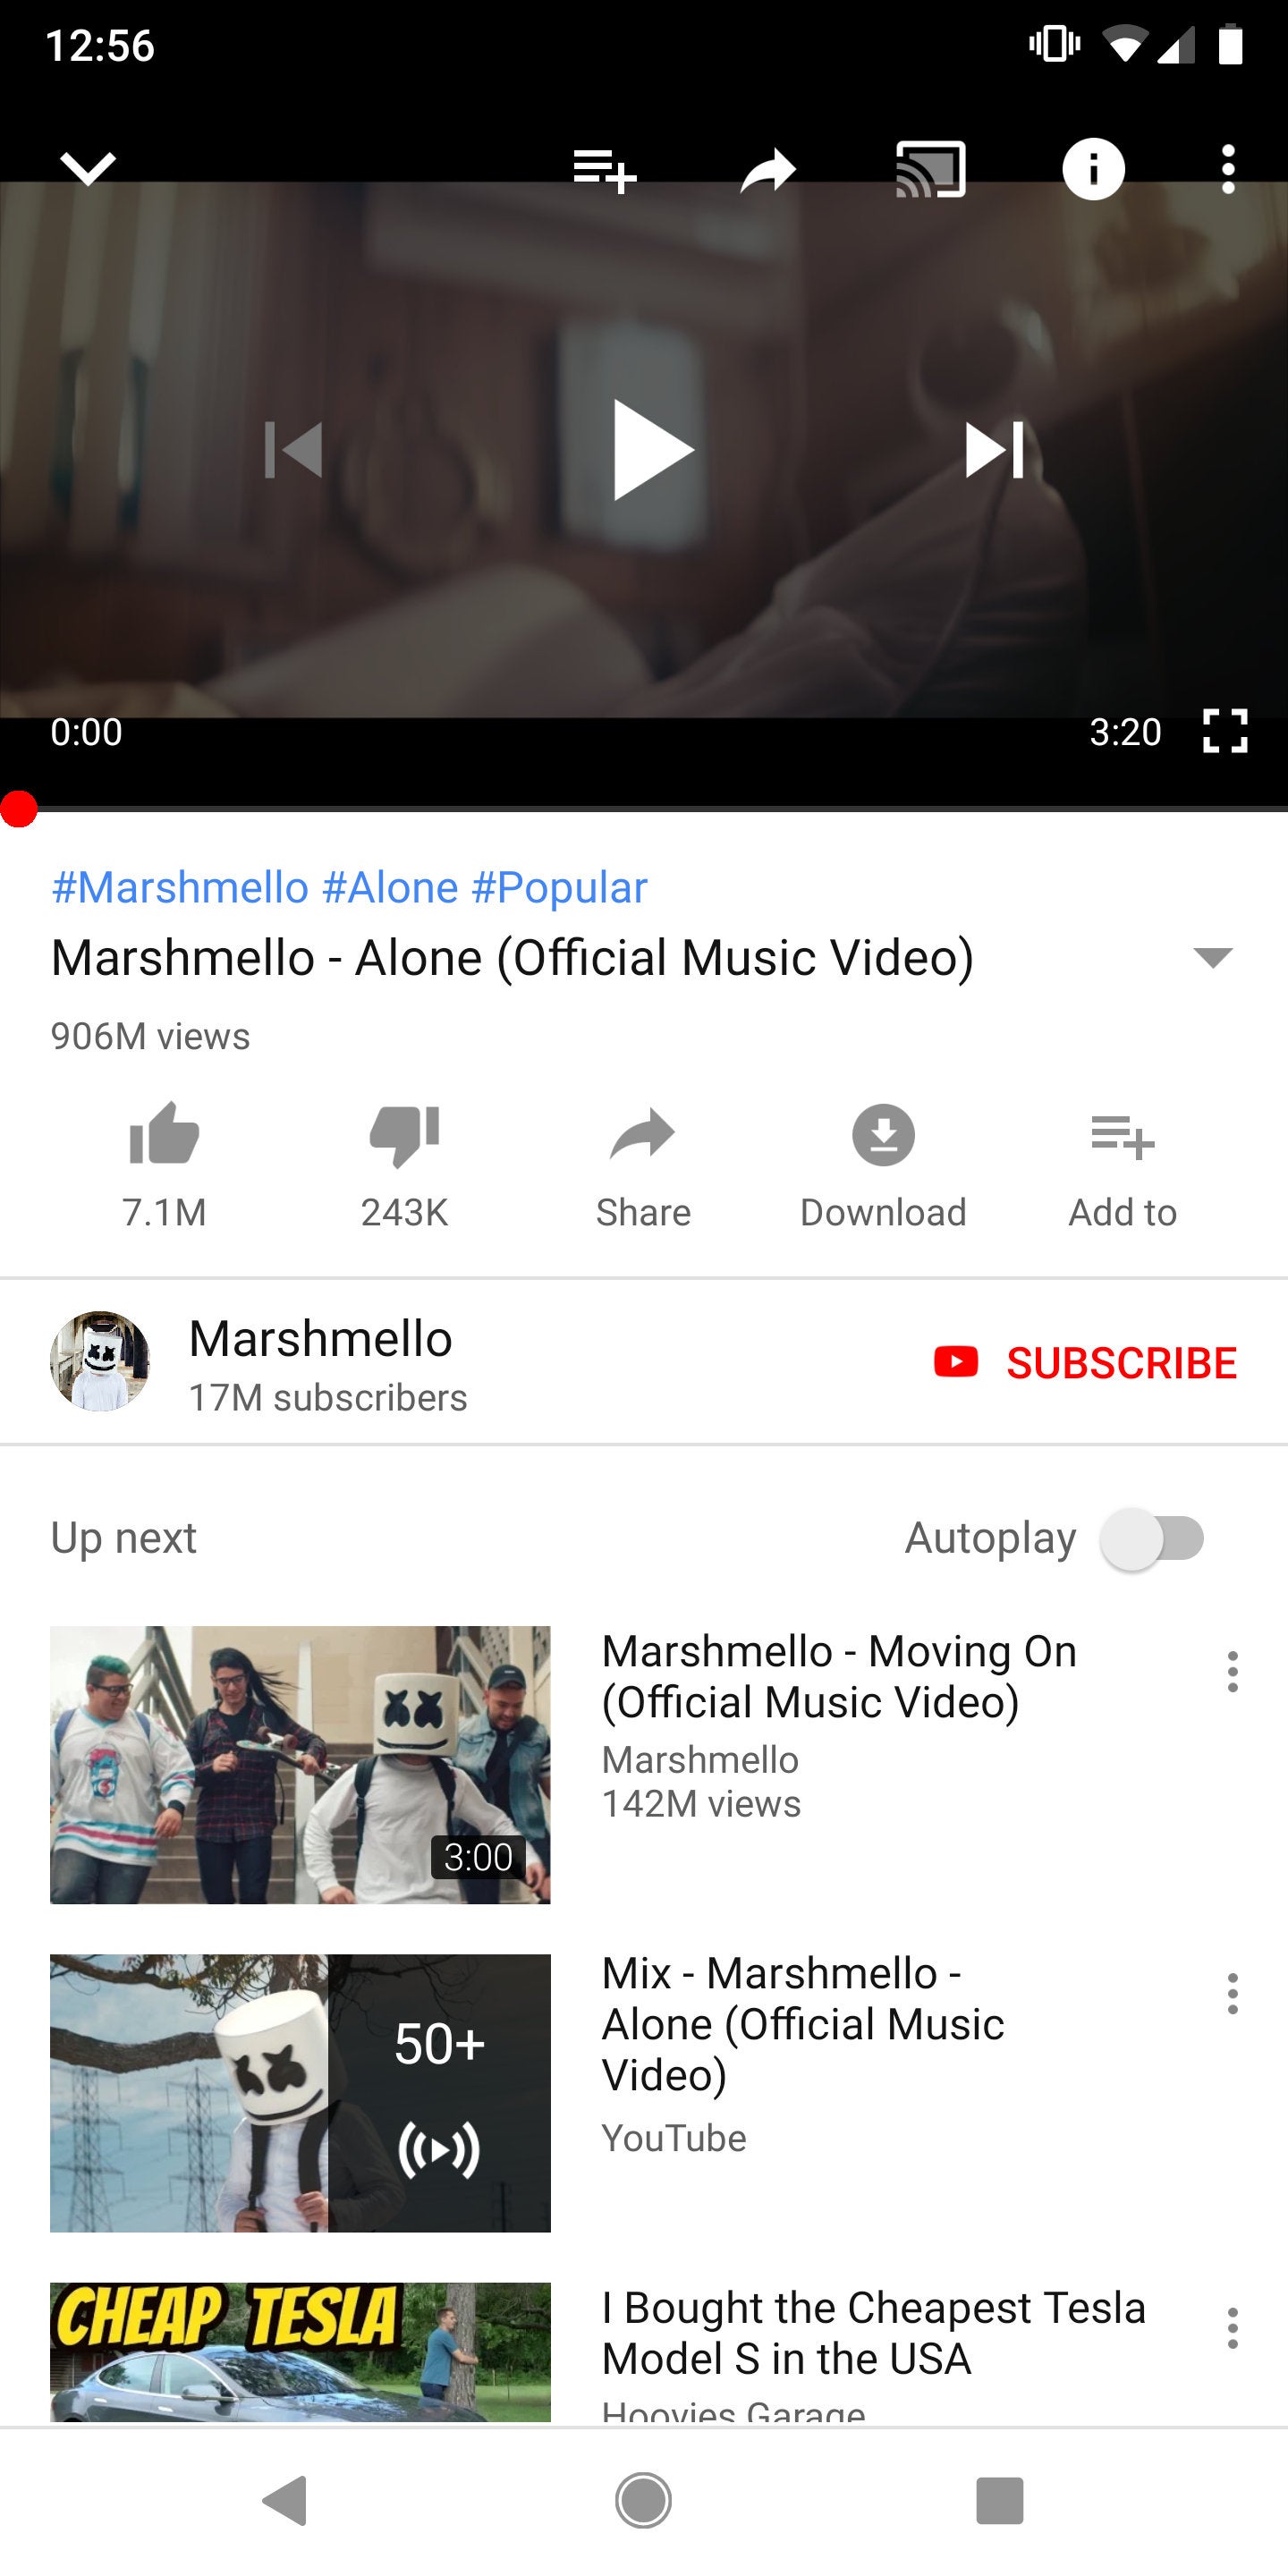 YouTube update adds hashtags above video titles, makes search easier